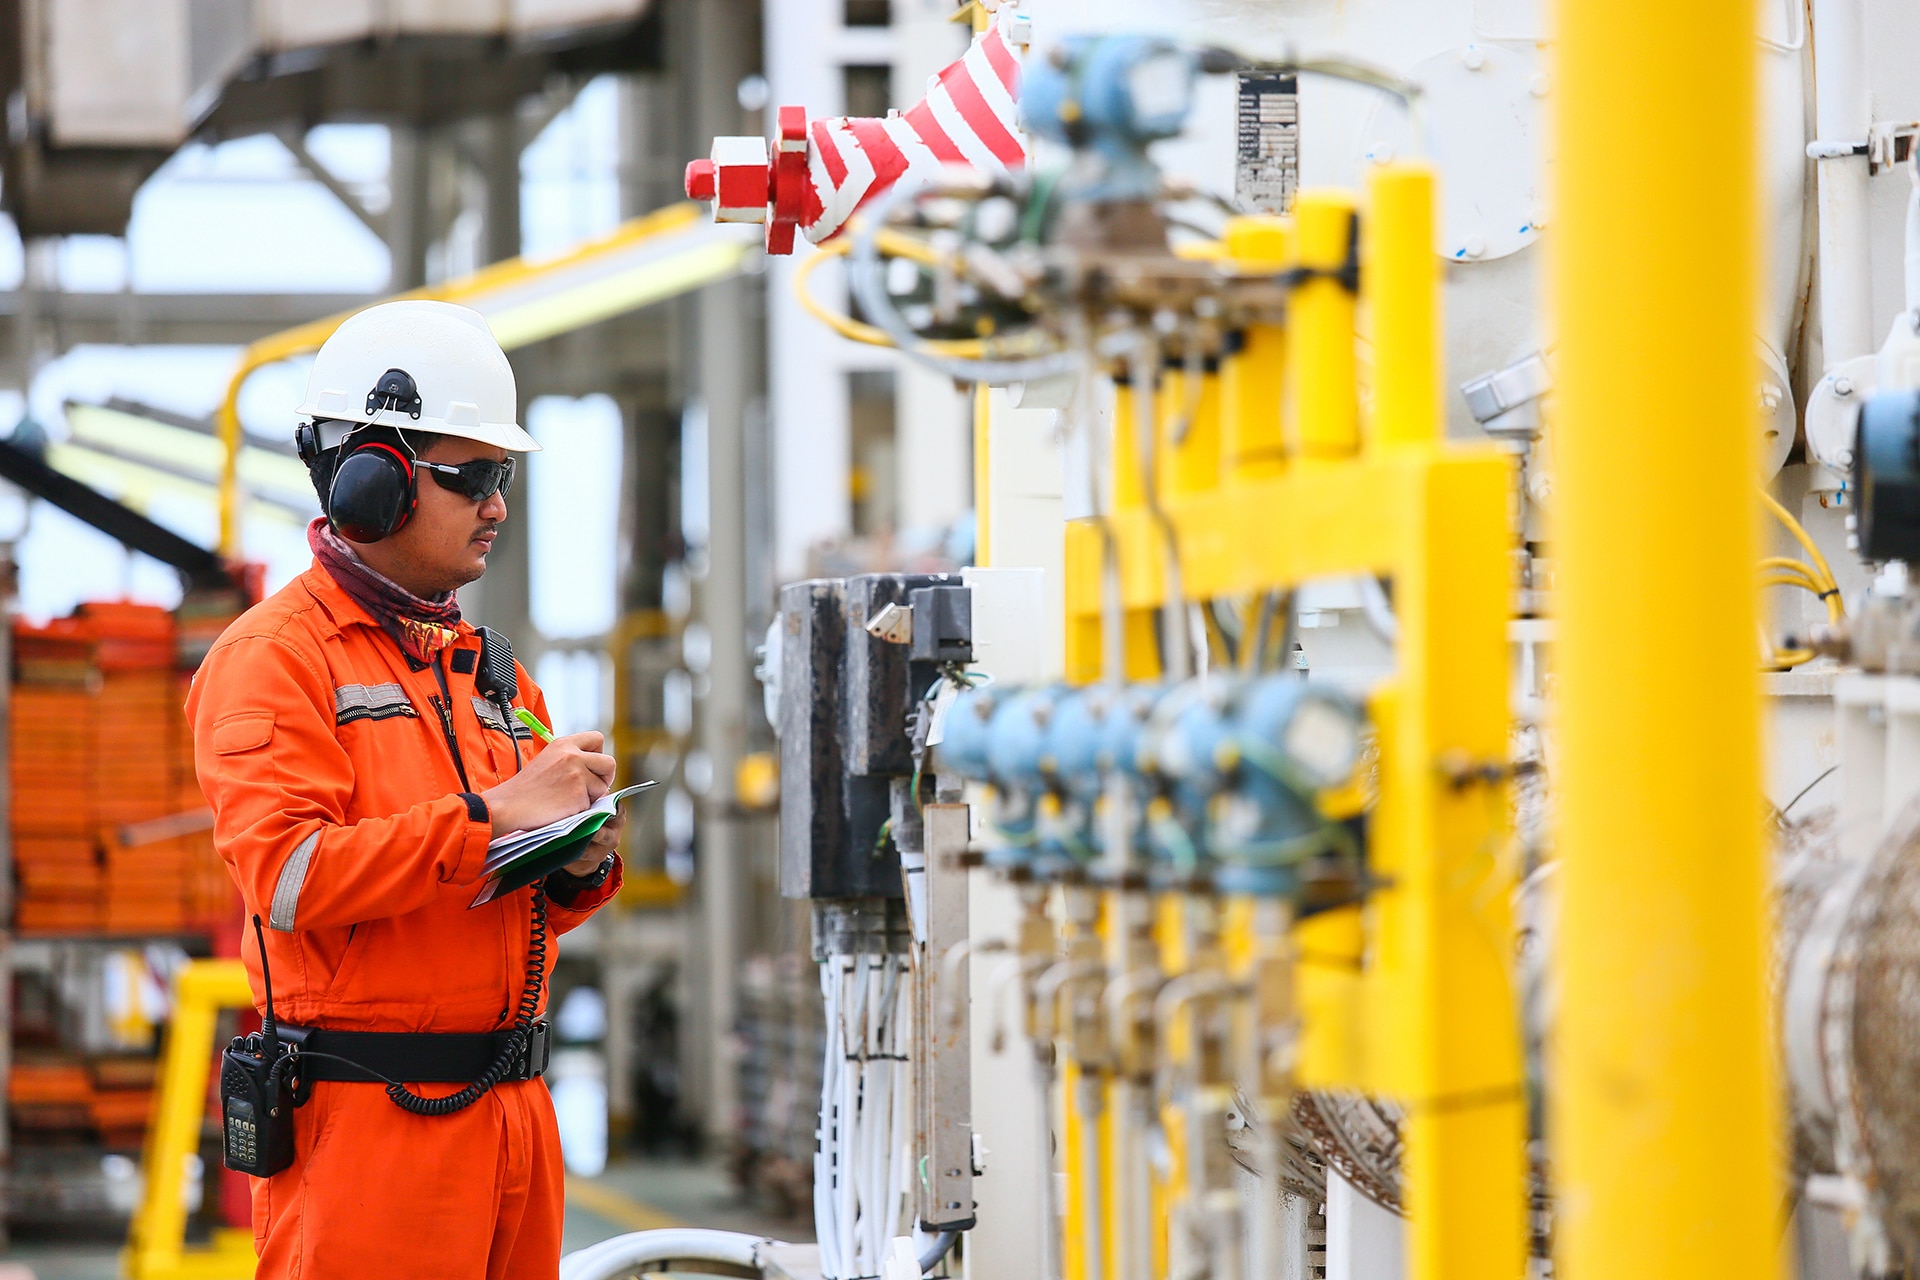 Operator recording operation of oil and gas process at oil and rig plant.